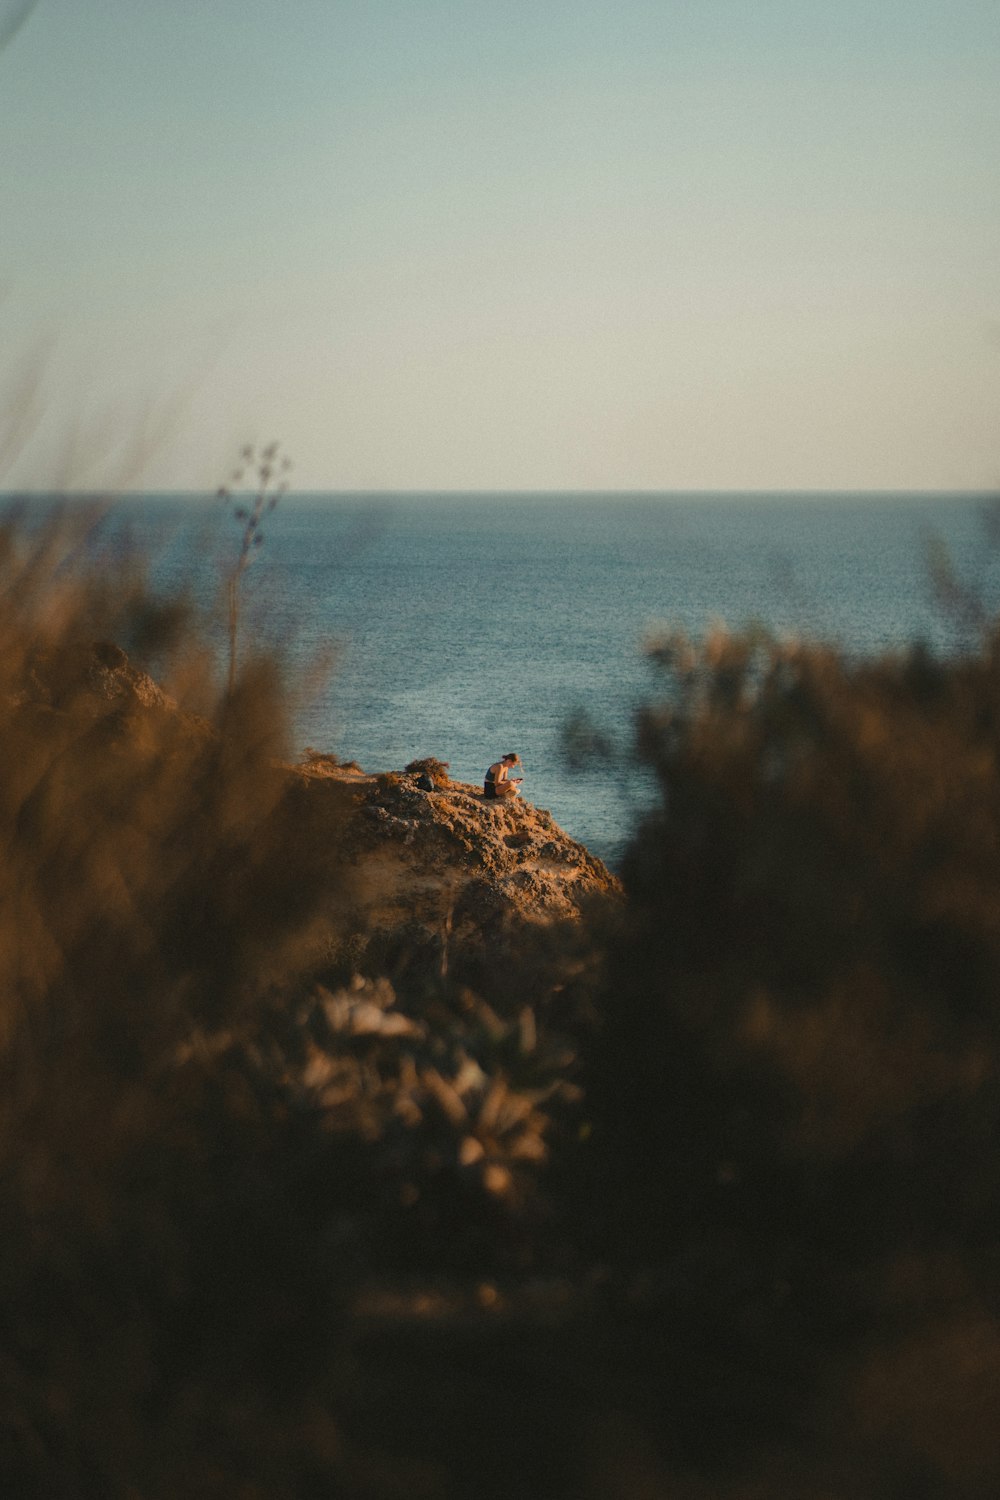 a person sitting on a rock